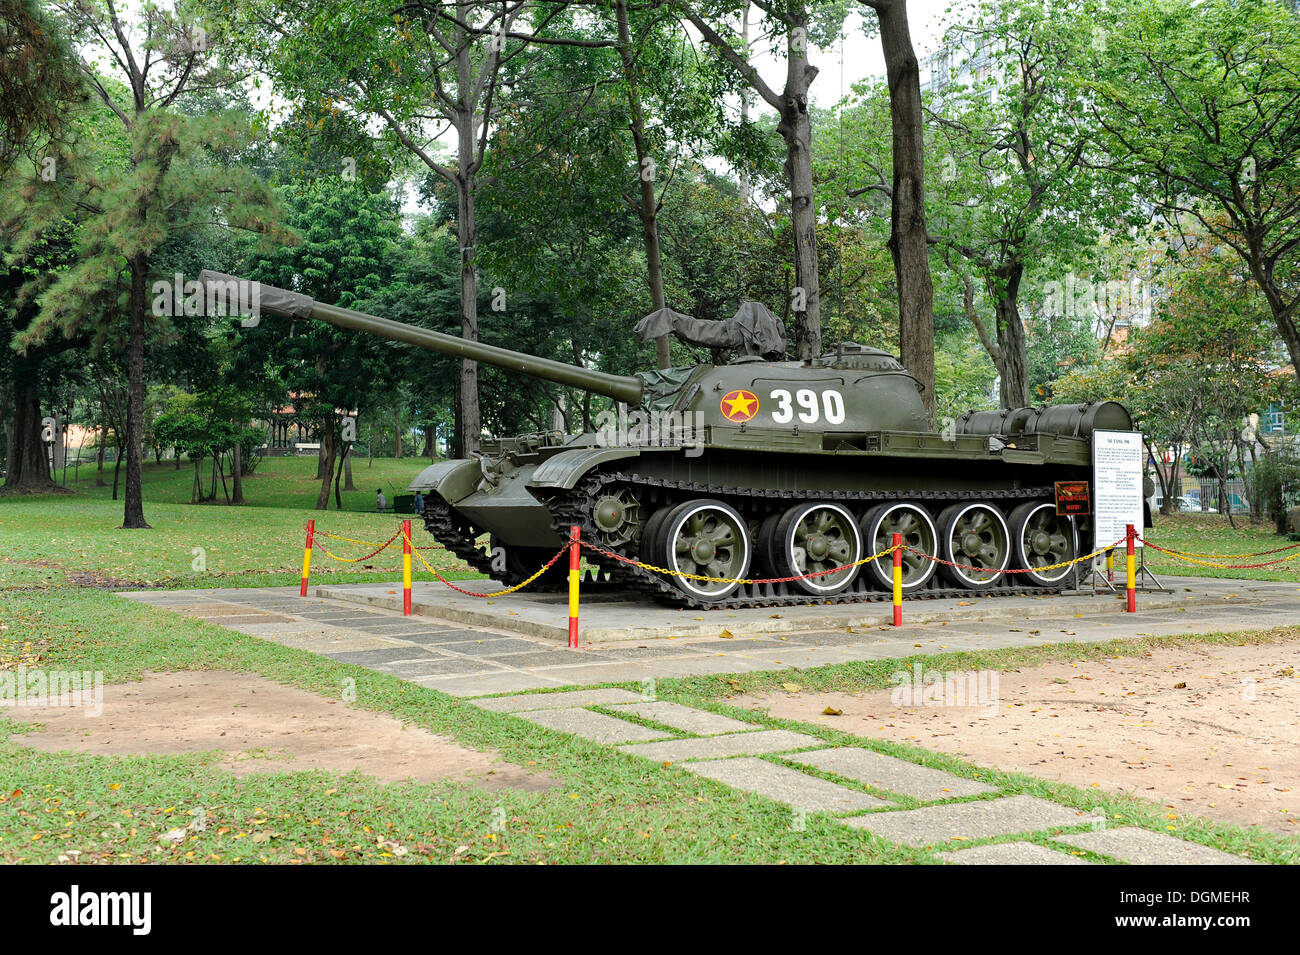 North Vietnamese tank on the grounds of the Reunification Palace, Reunion Hall, former seat of government, Ho Chi Minh City Stock Photo